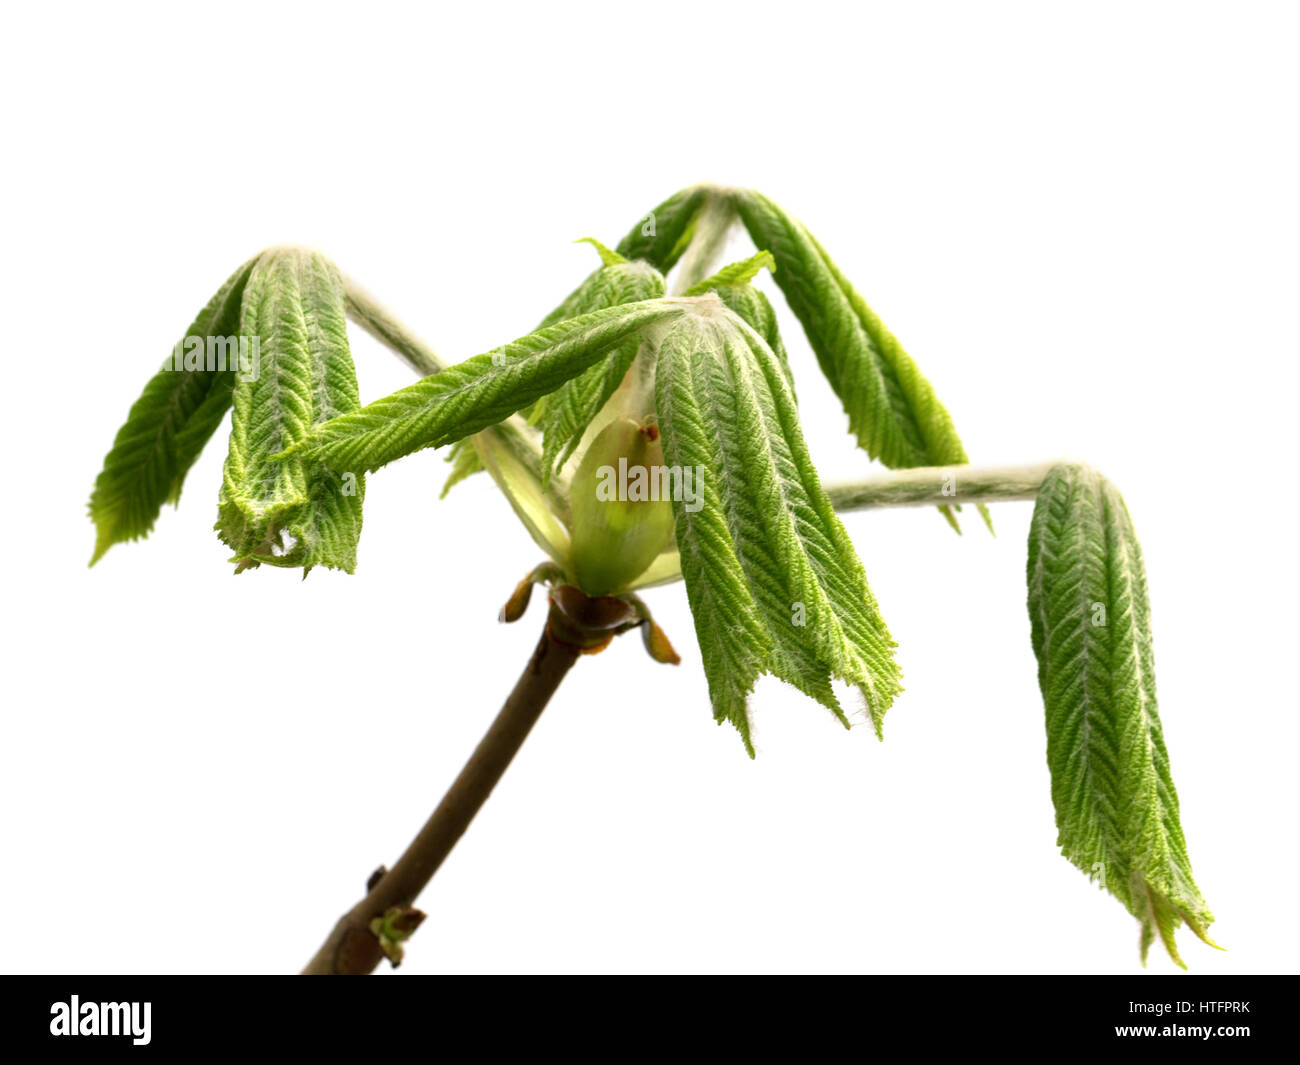 Spring twigs of horse chestnut tree (Aesculus hippocastanum) with young green leaves. Isolated on white background. Close-up view. Stock Photo